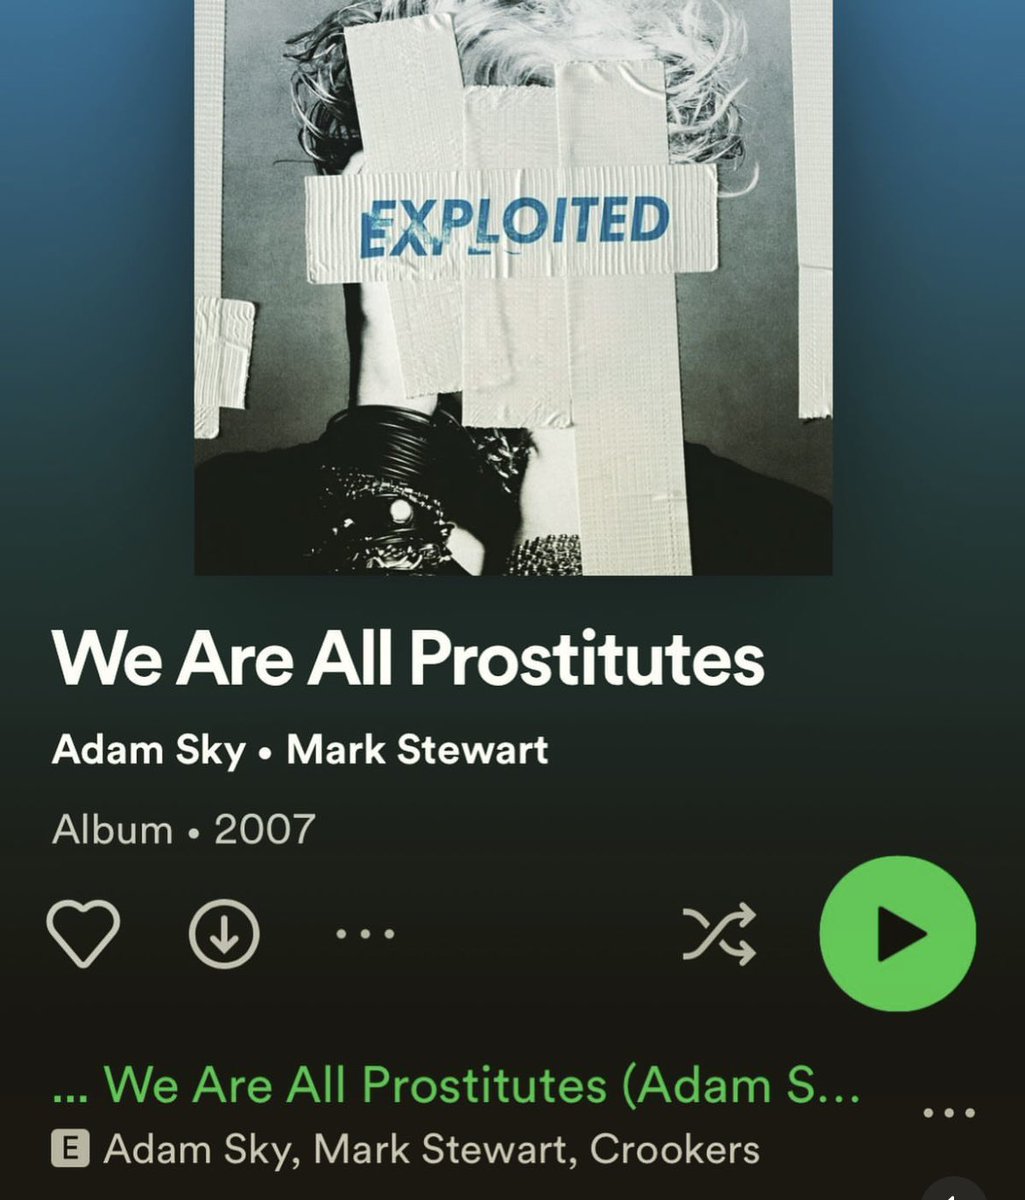 i’m gutted to hear the terrible news about my dear old friend @_markstewart i got to know him as his synth player on tour in Japan ‘92 with @onusound he was super inspiring + encouraging + remaking #weareallprostitutes @ThePopGroup @exploitedrec …i’m deeply sad today 🖤🙏🏻